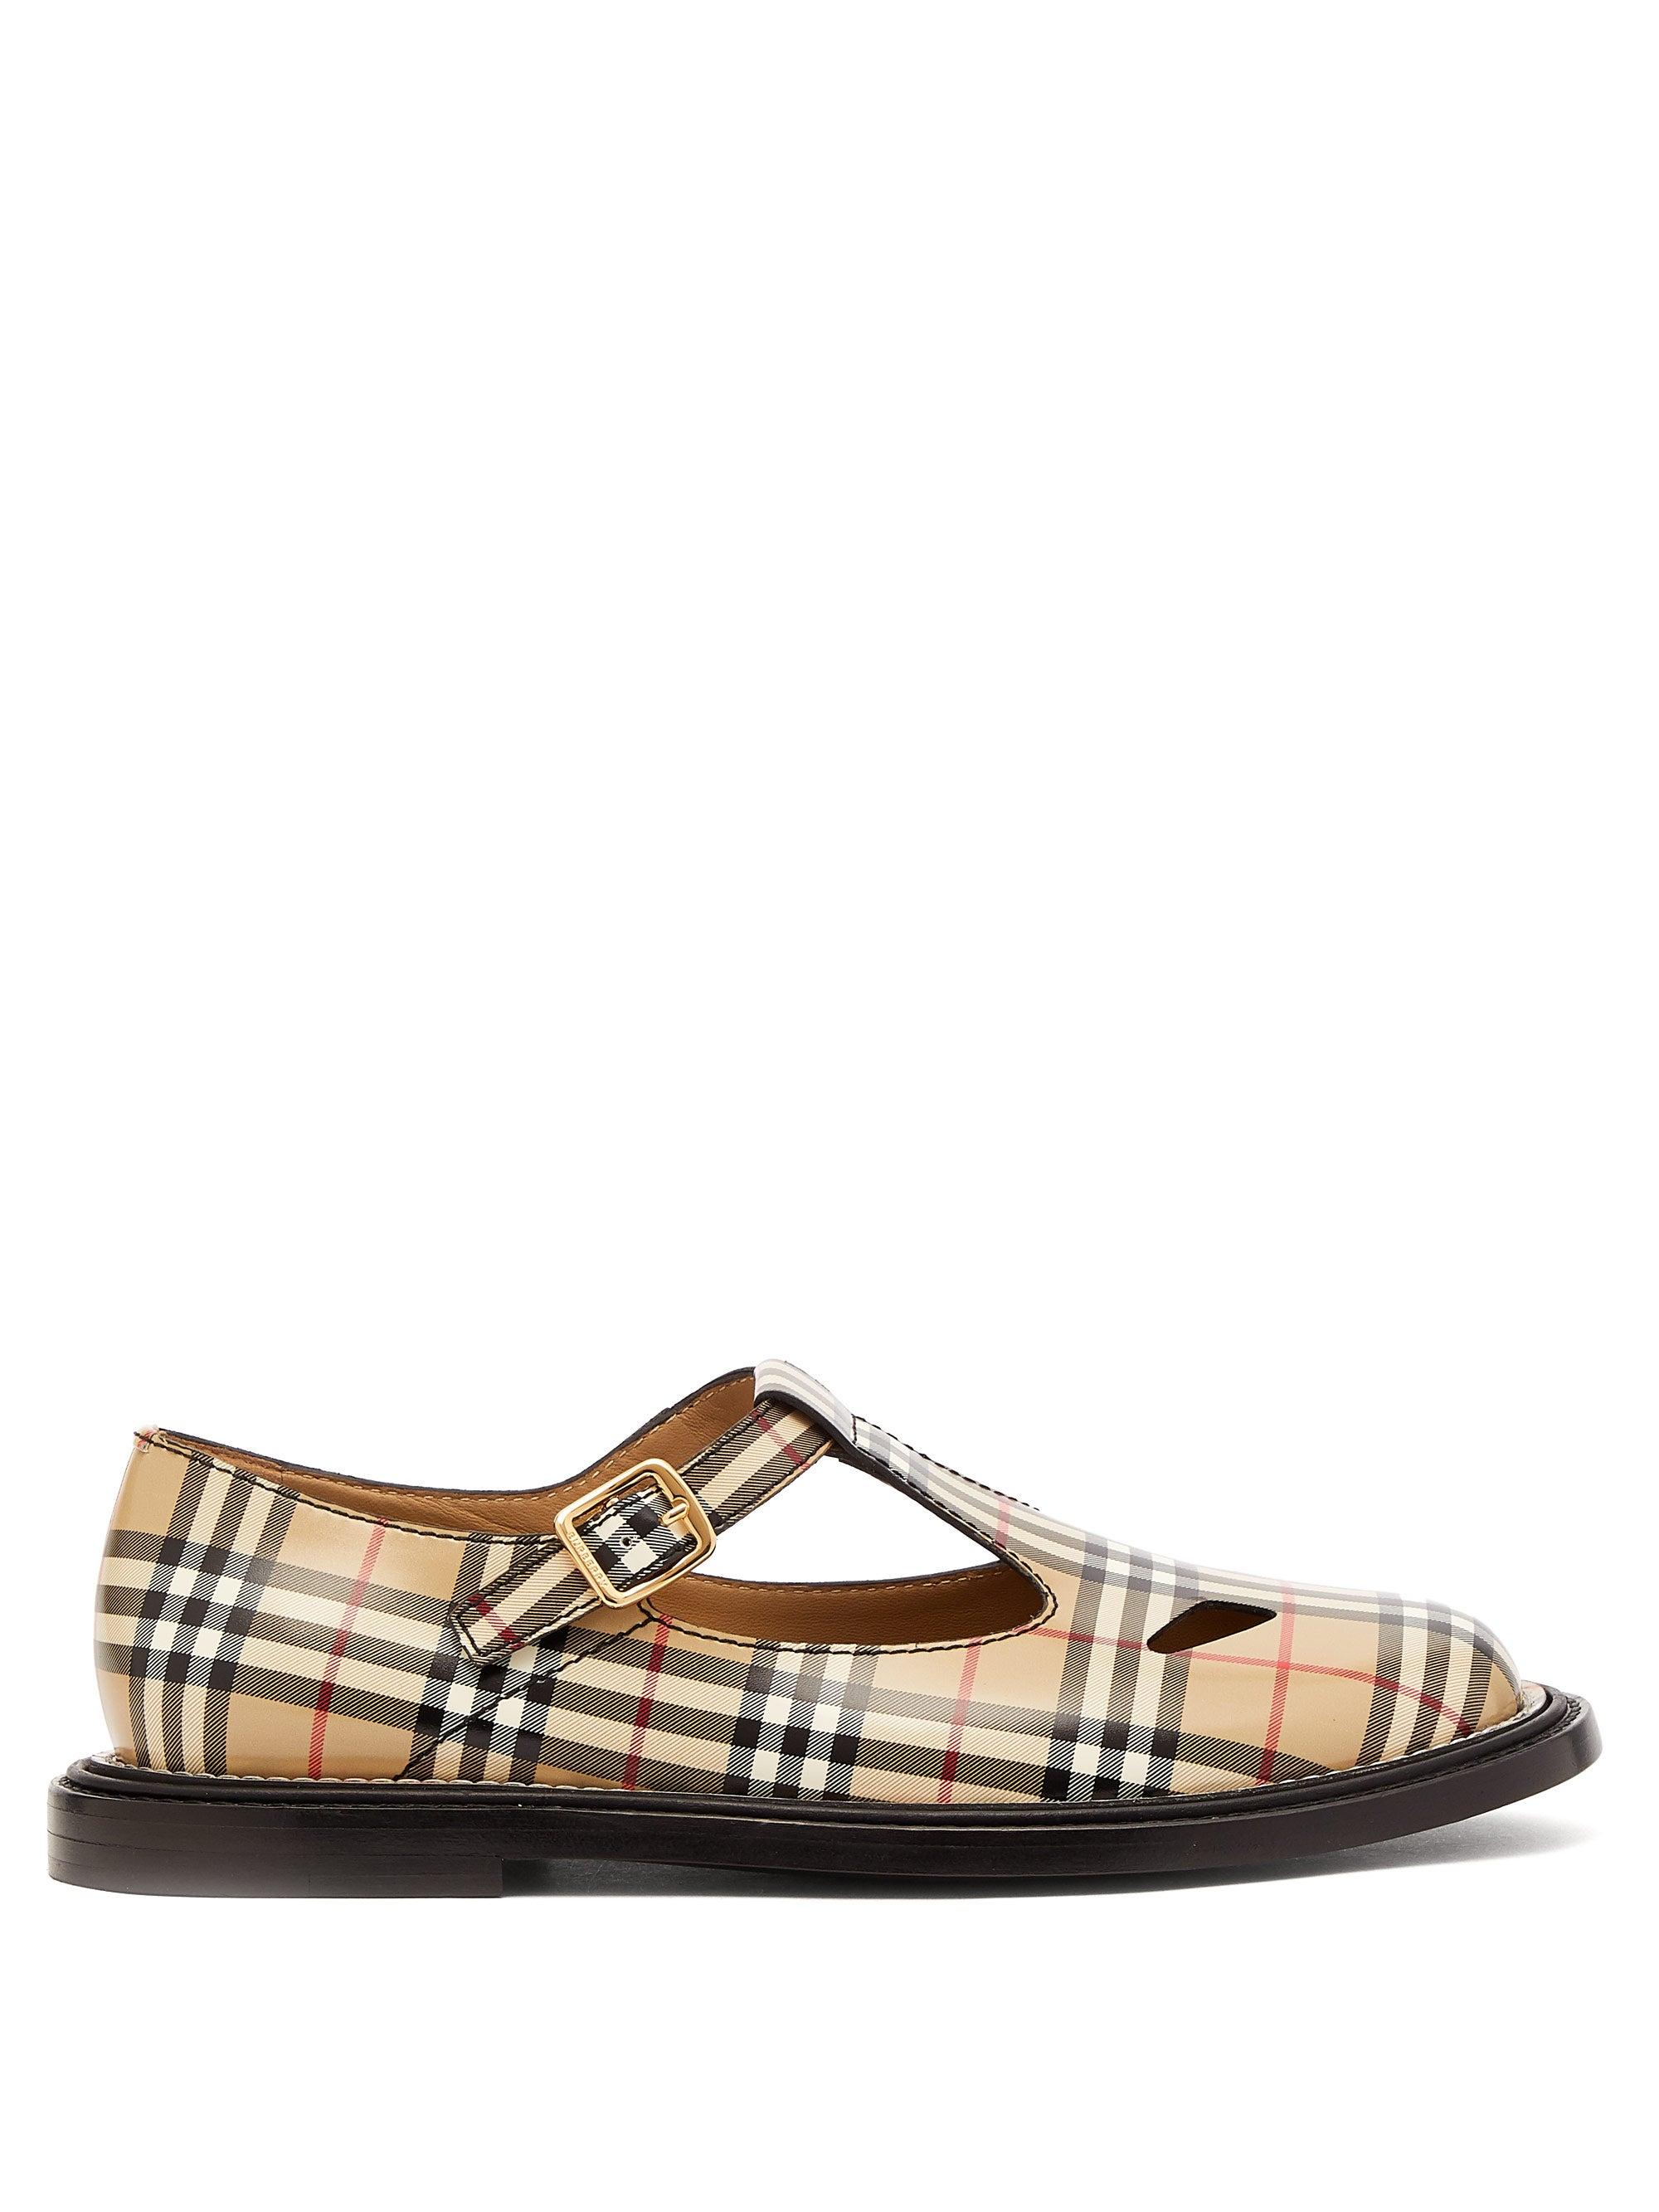 burberry leather shoes